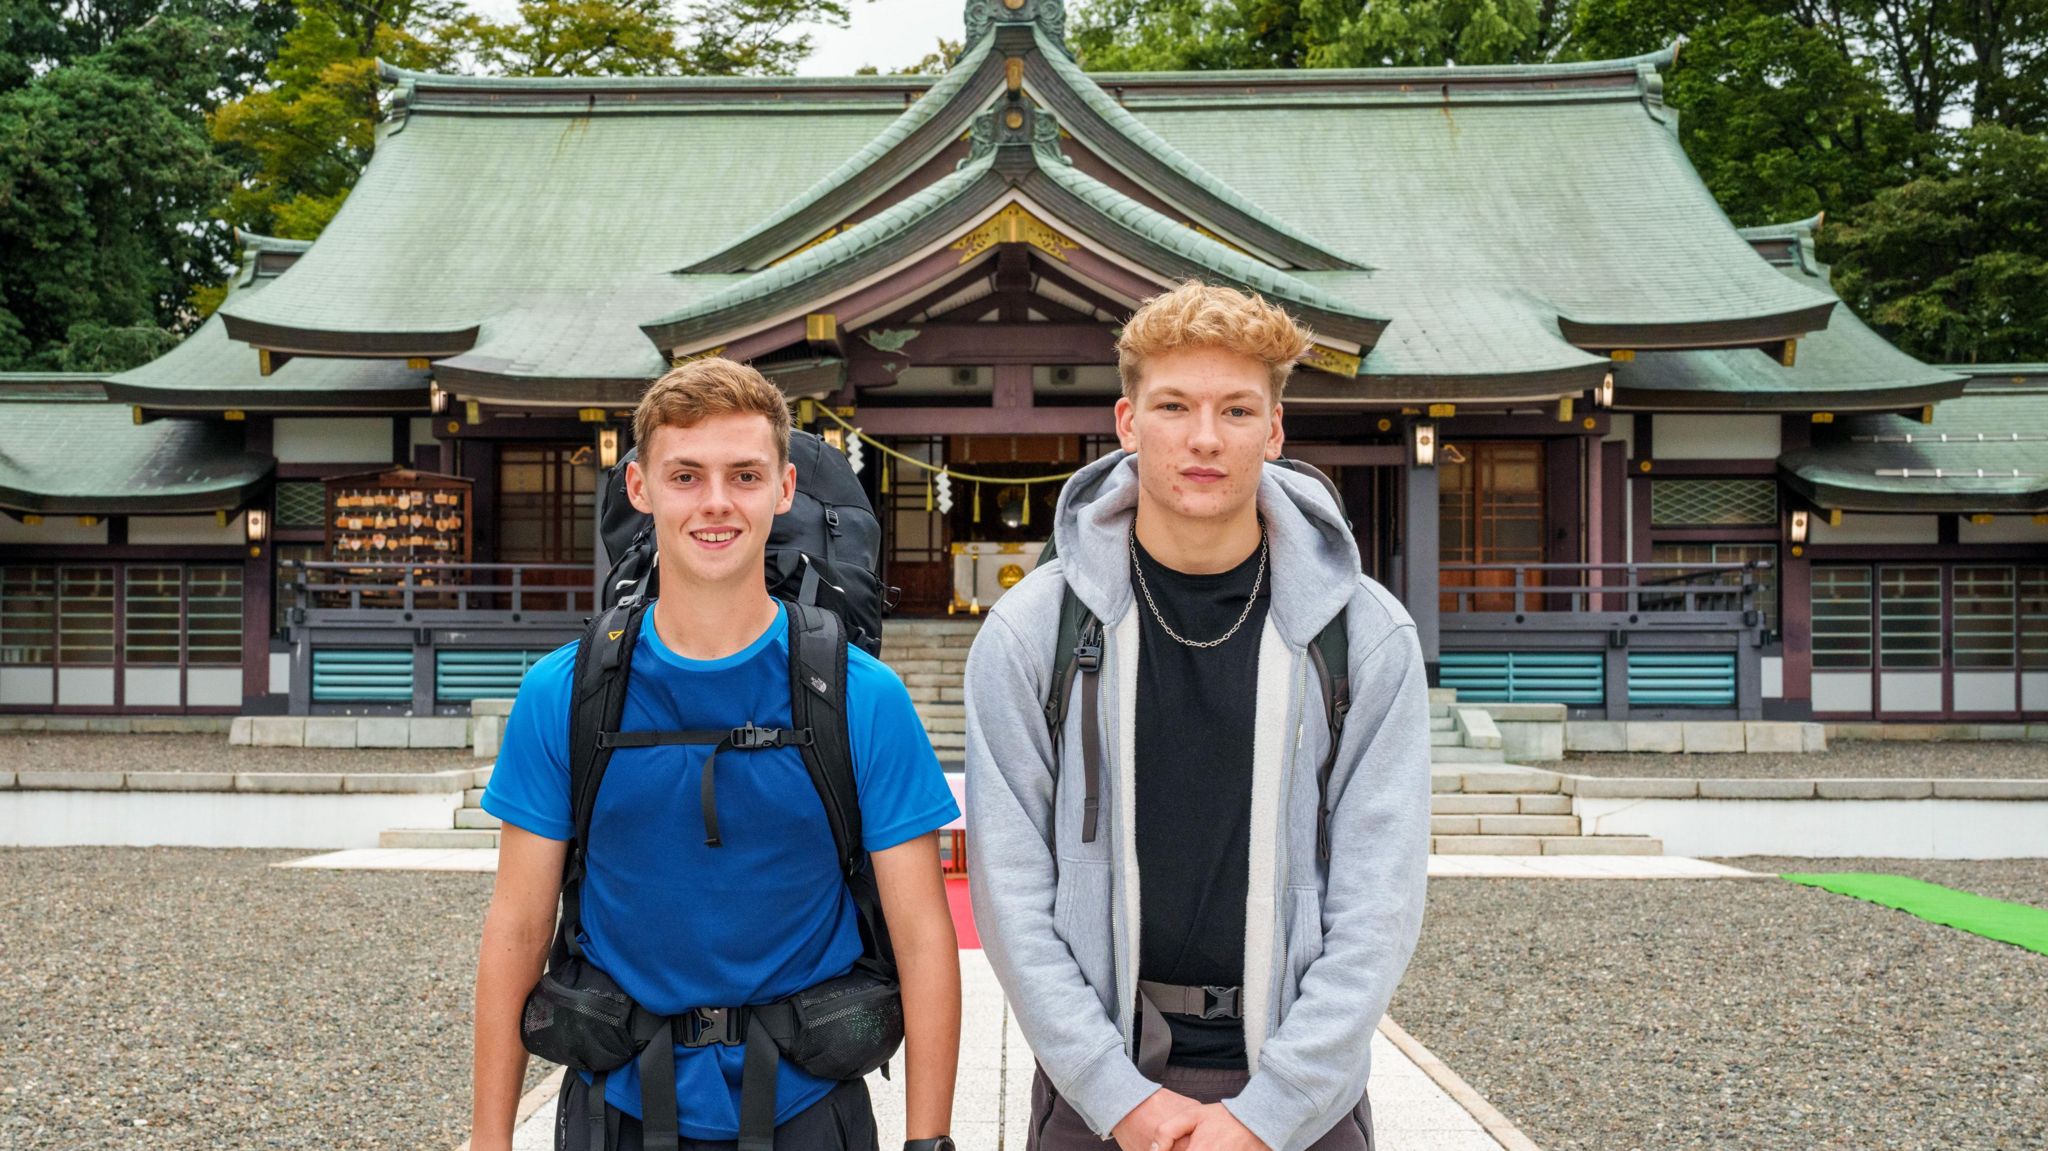 Alfie Watts and Owen Wood standing in front of a temple in Asia